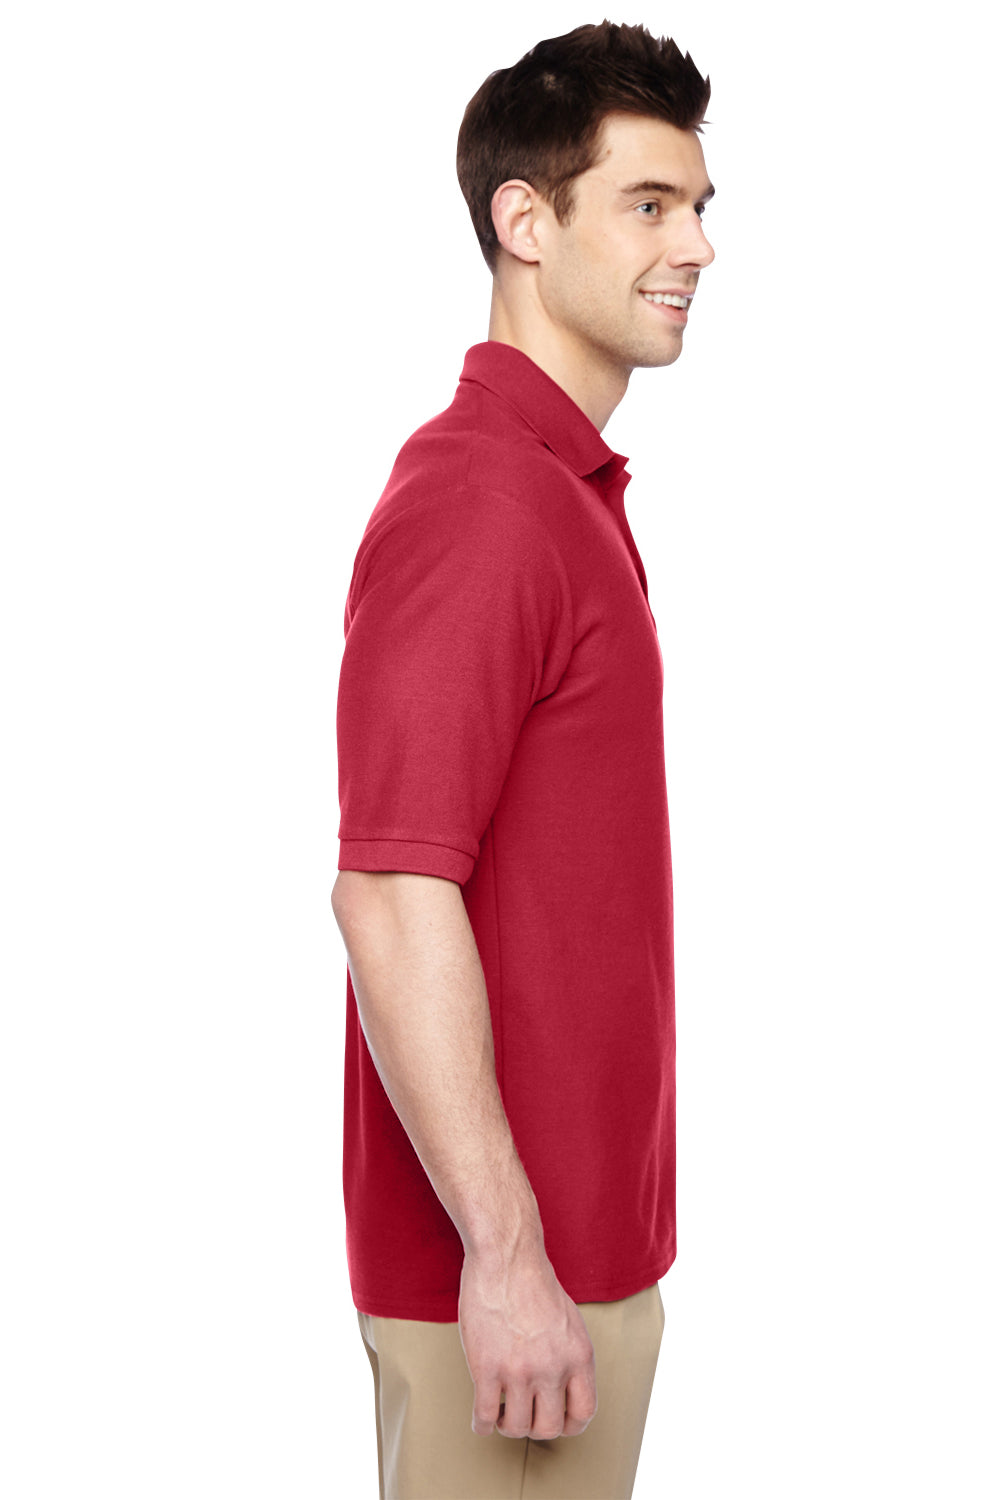 Jerzees 537MSR Mens Easy Care Moisture Wicking Short Sleeve Polo Shirt Red Side